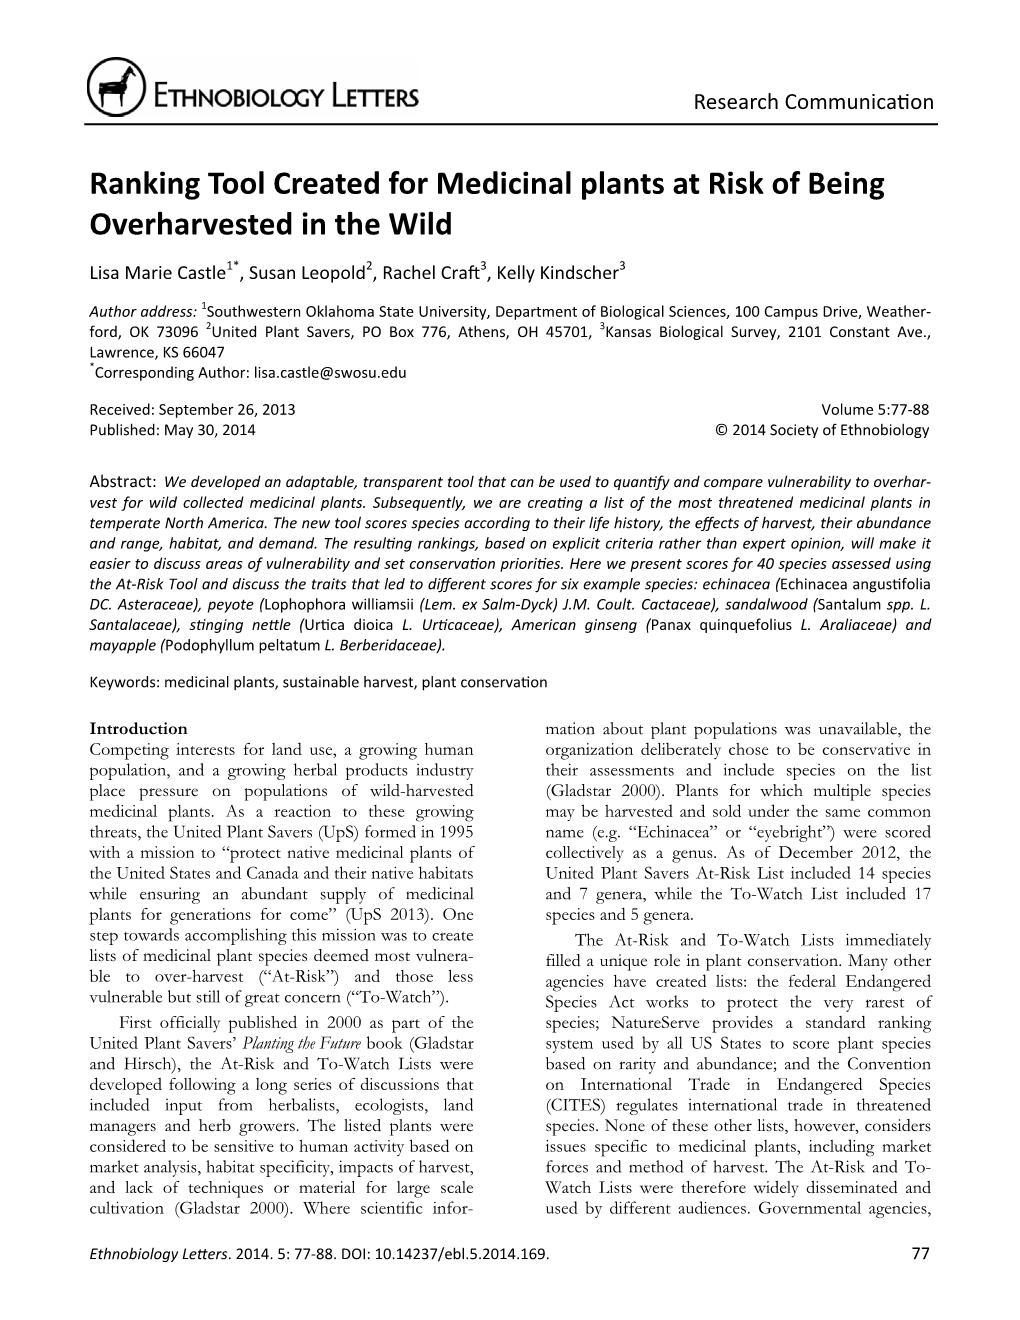 Ranking Tool Created for Medicinal Plants at Risk of Being Overharvested in the Wild